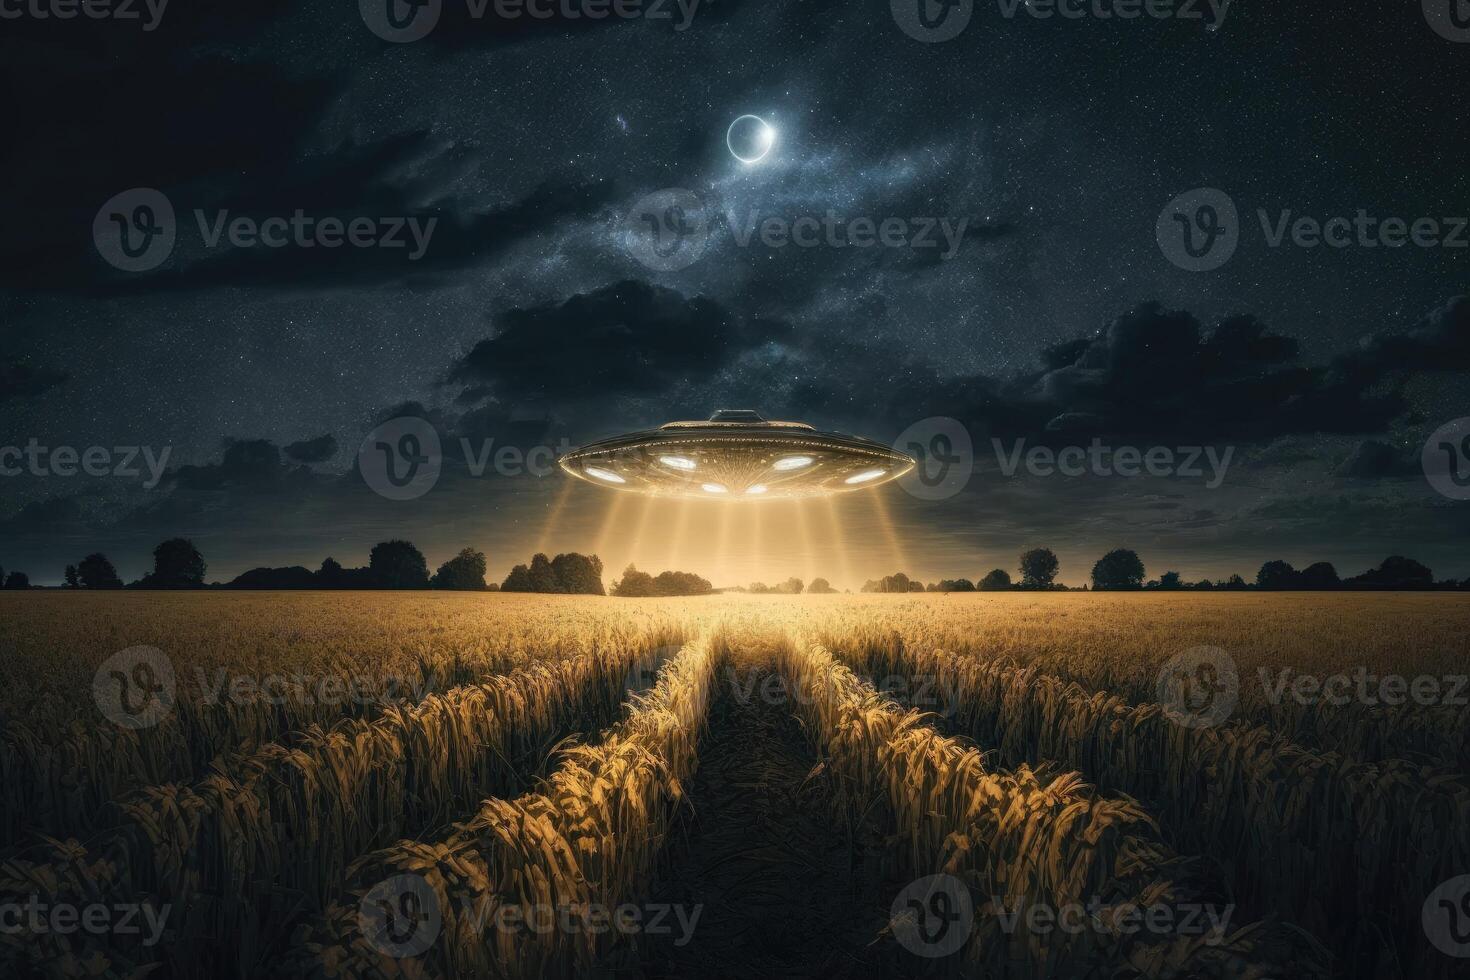 The UFO's metallic surface gleamed in the moonlight as it hovered silently above the field. photo